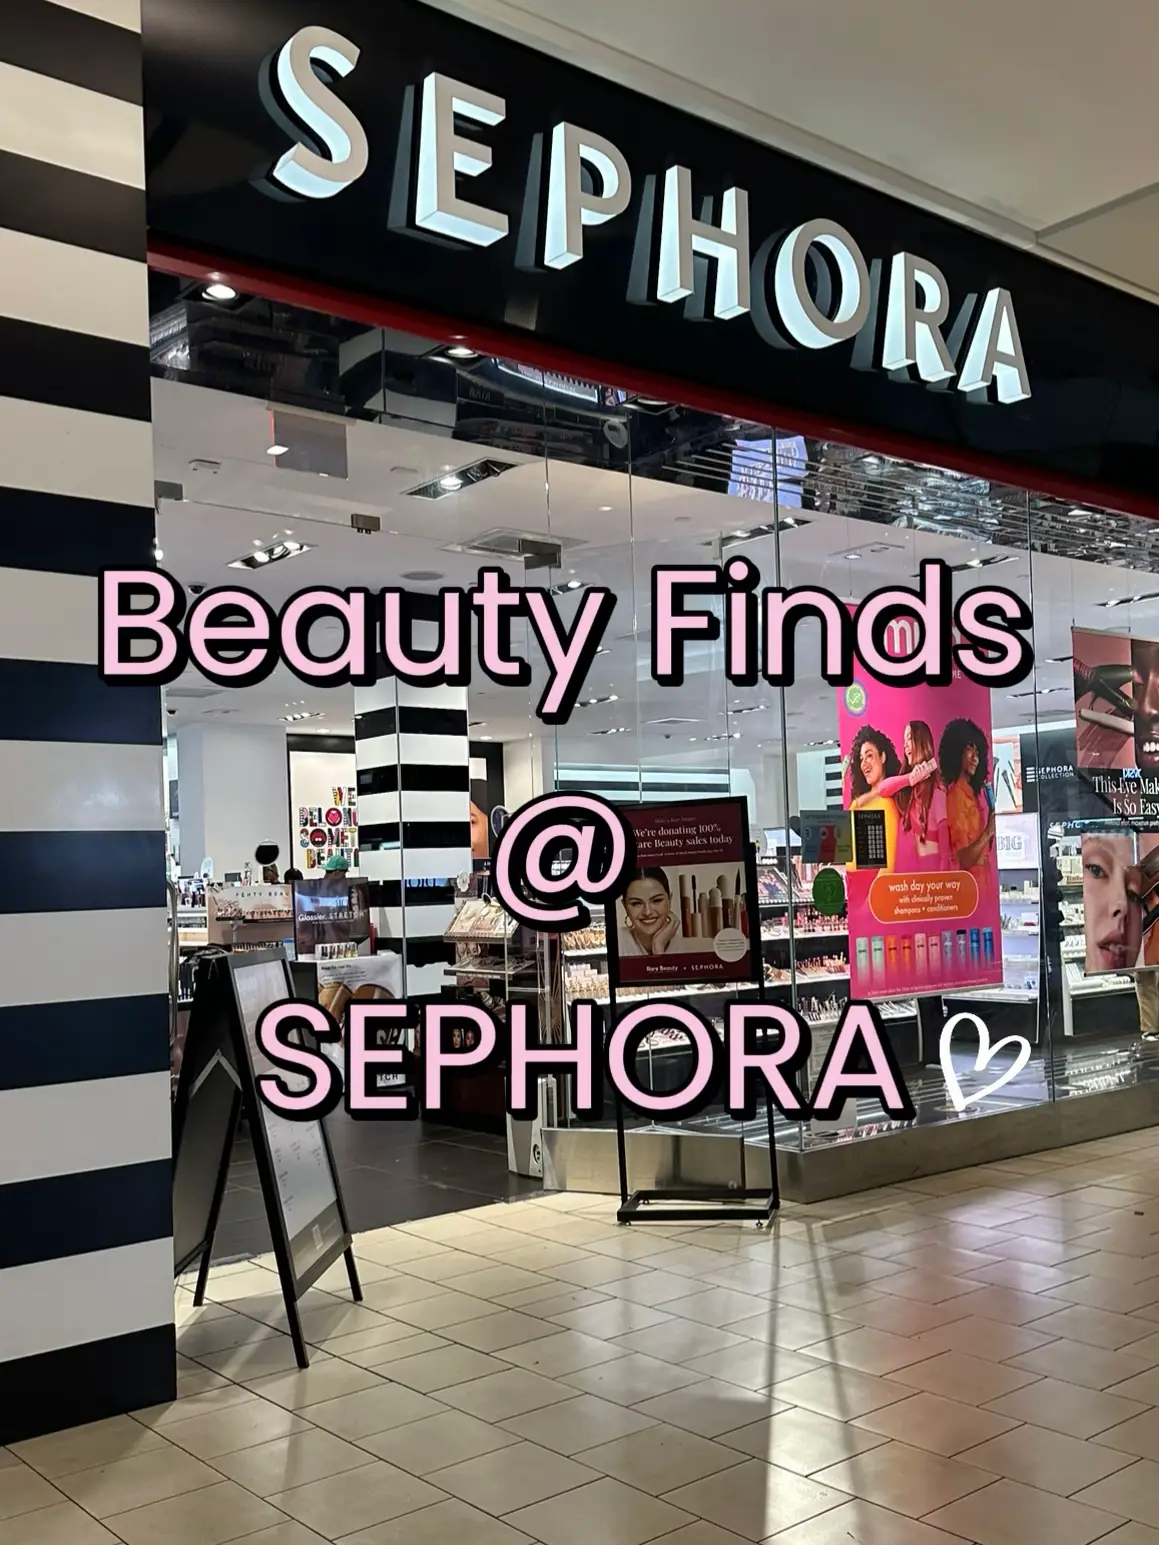 THE BEST SEPHORA LOCATION EVER!, Gallery posted by Lexirosenstein